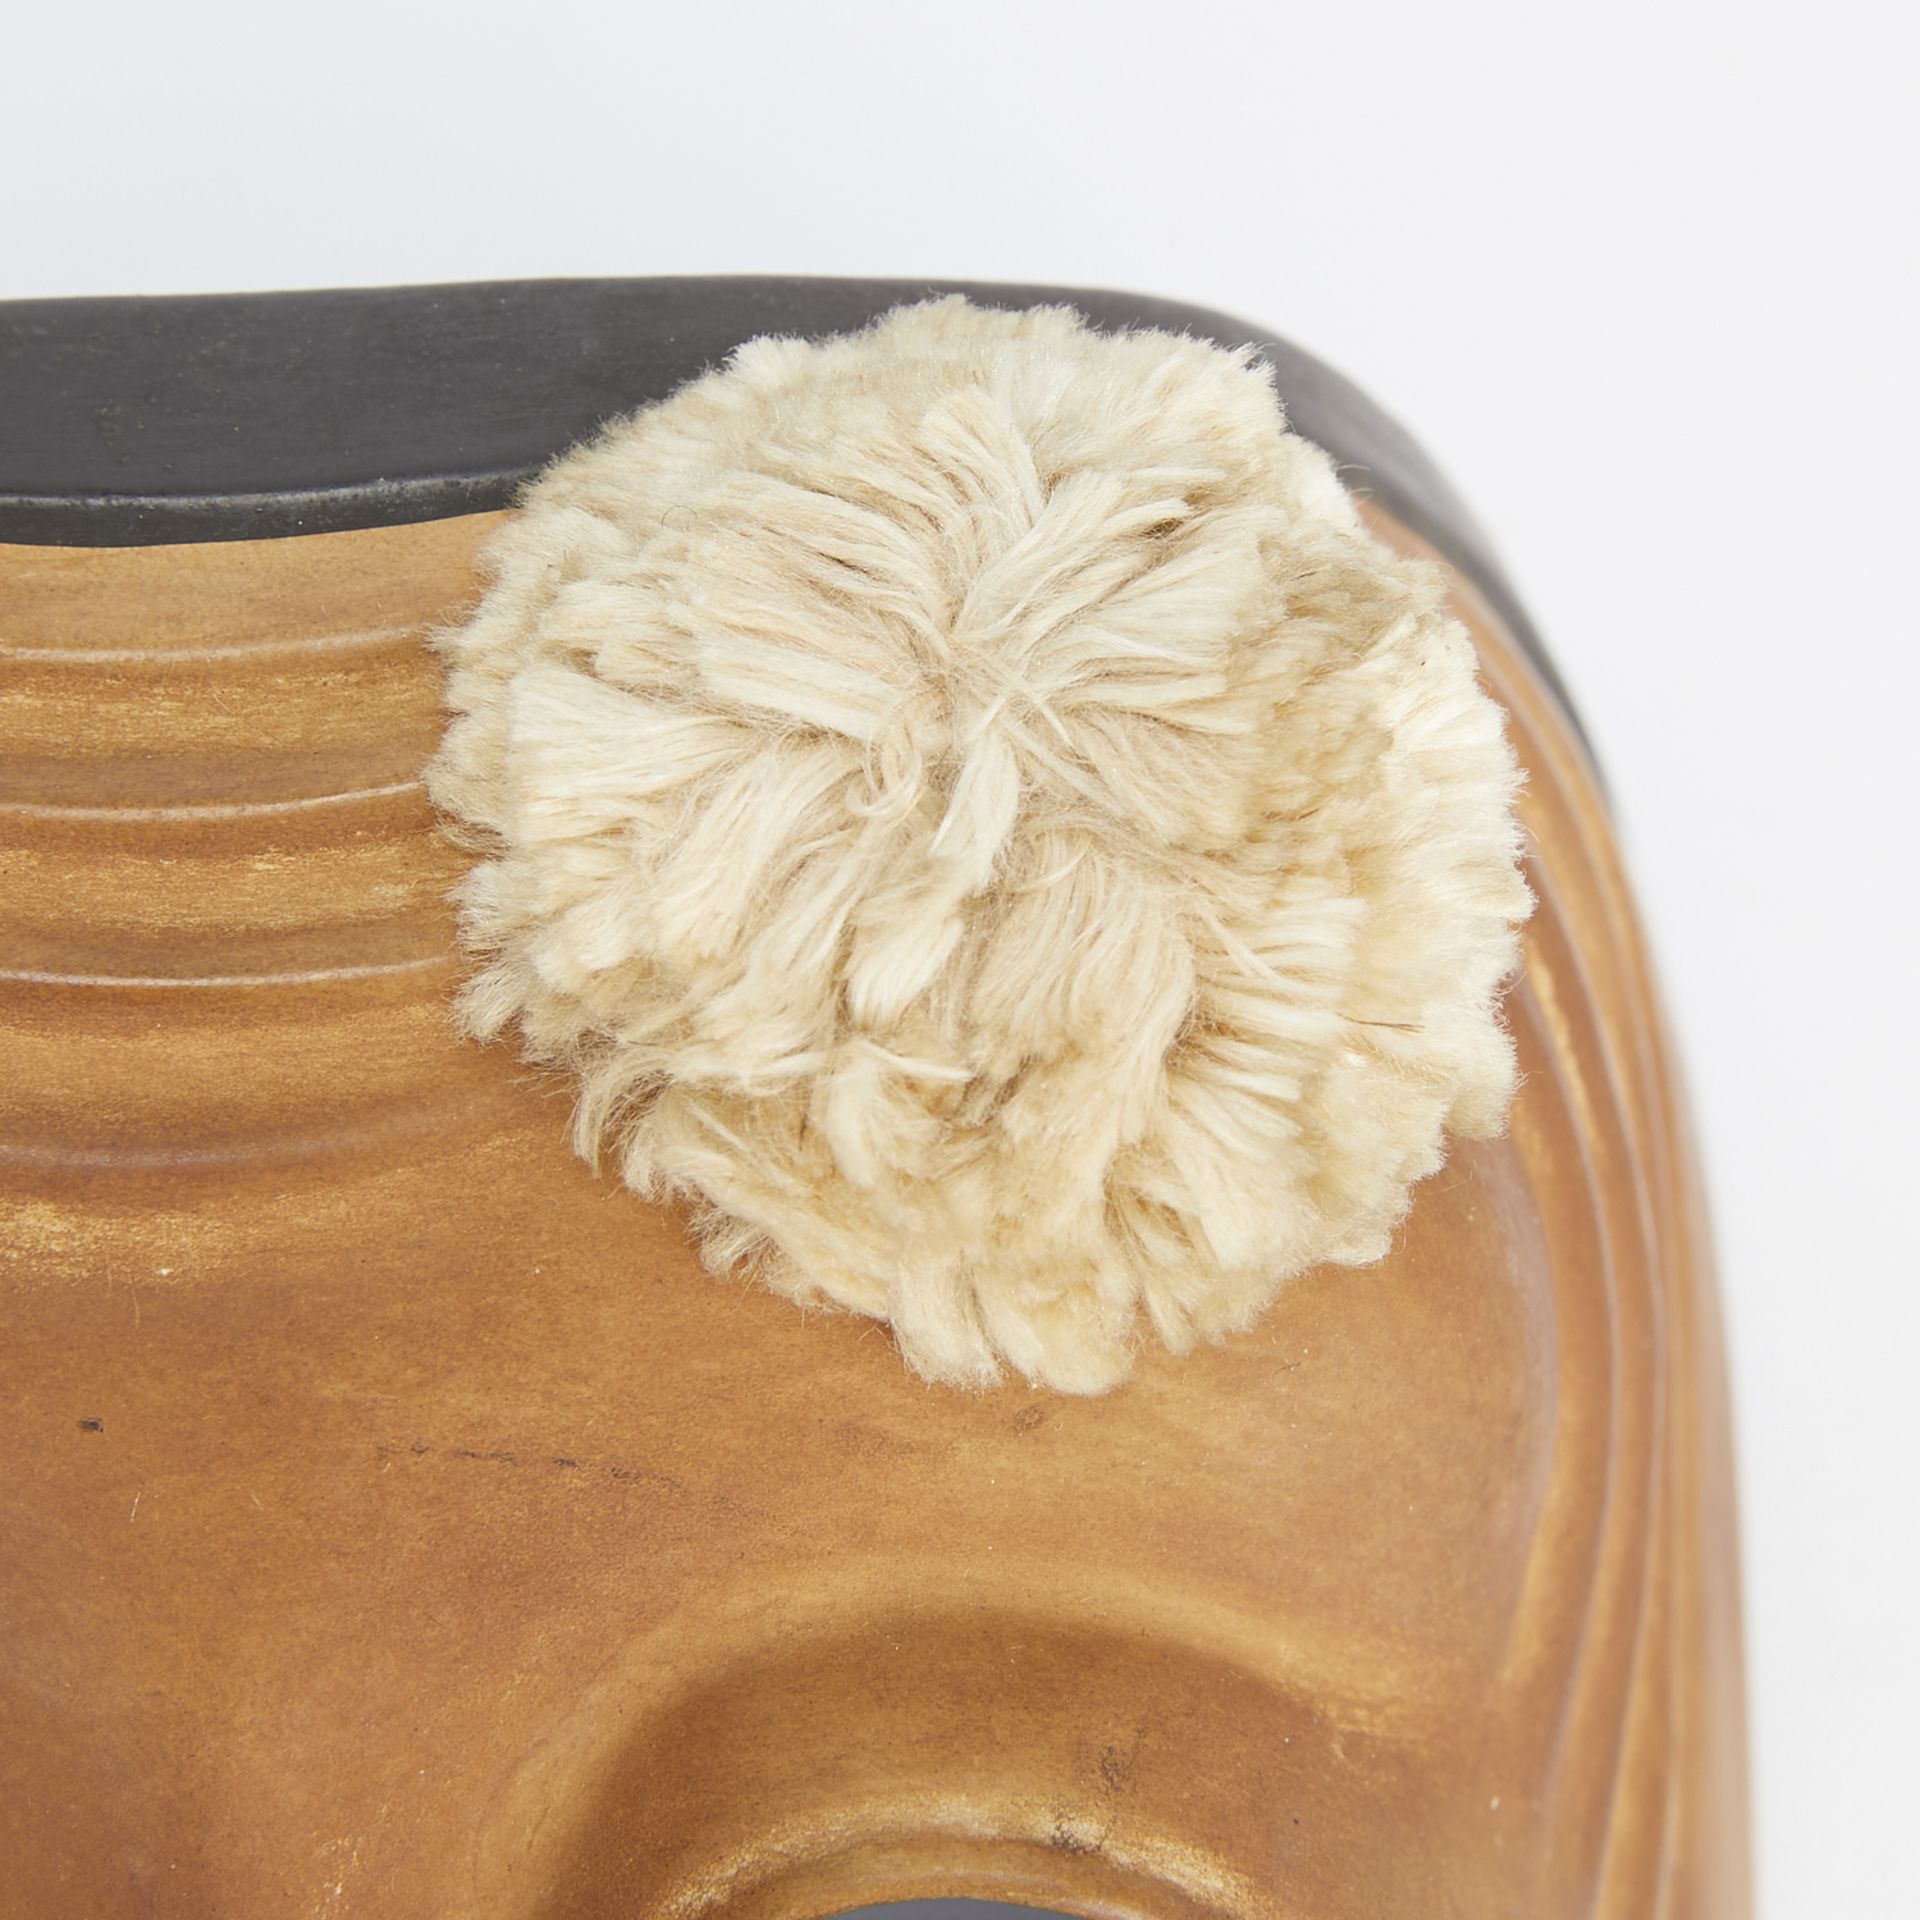 Kano Tessai Carved Wood Noh Mask - Image 6 of 15